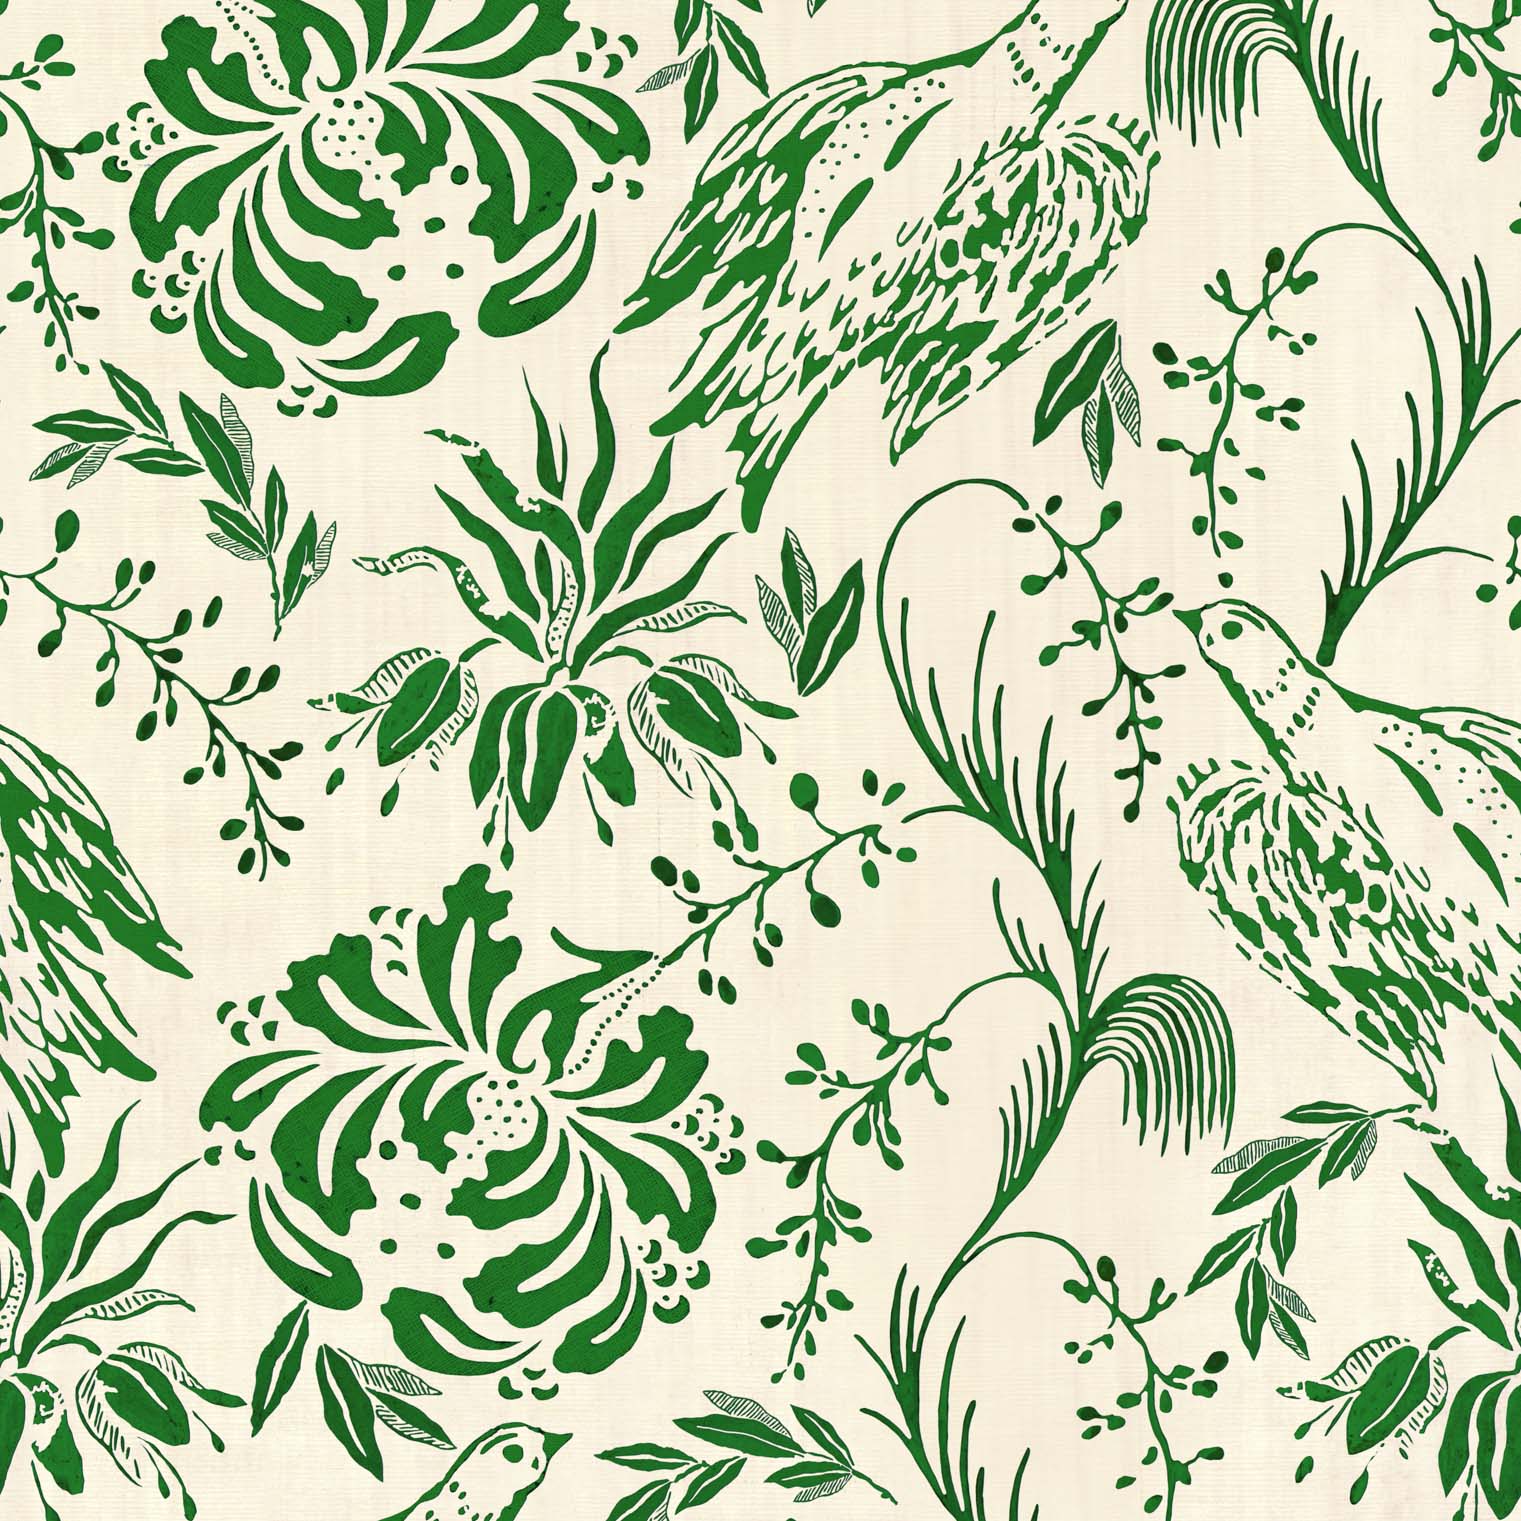 images/productimages/small/folk-embroidery-fern-green-52x70cm-wp30015-wallpaper.jpg